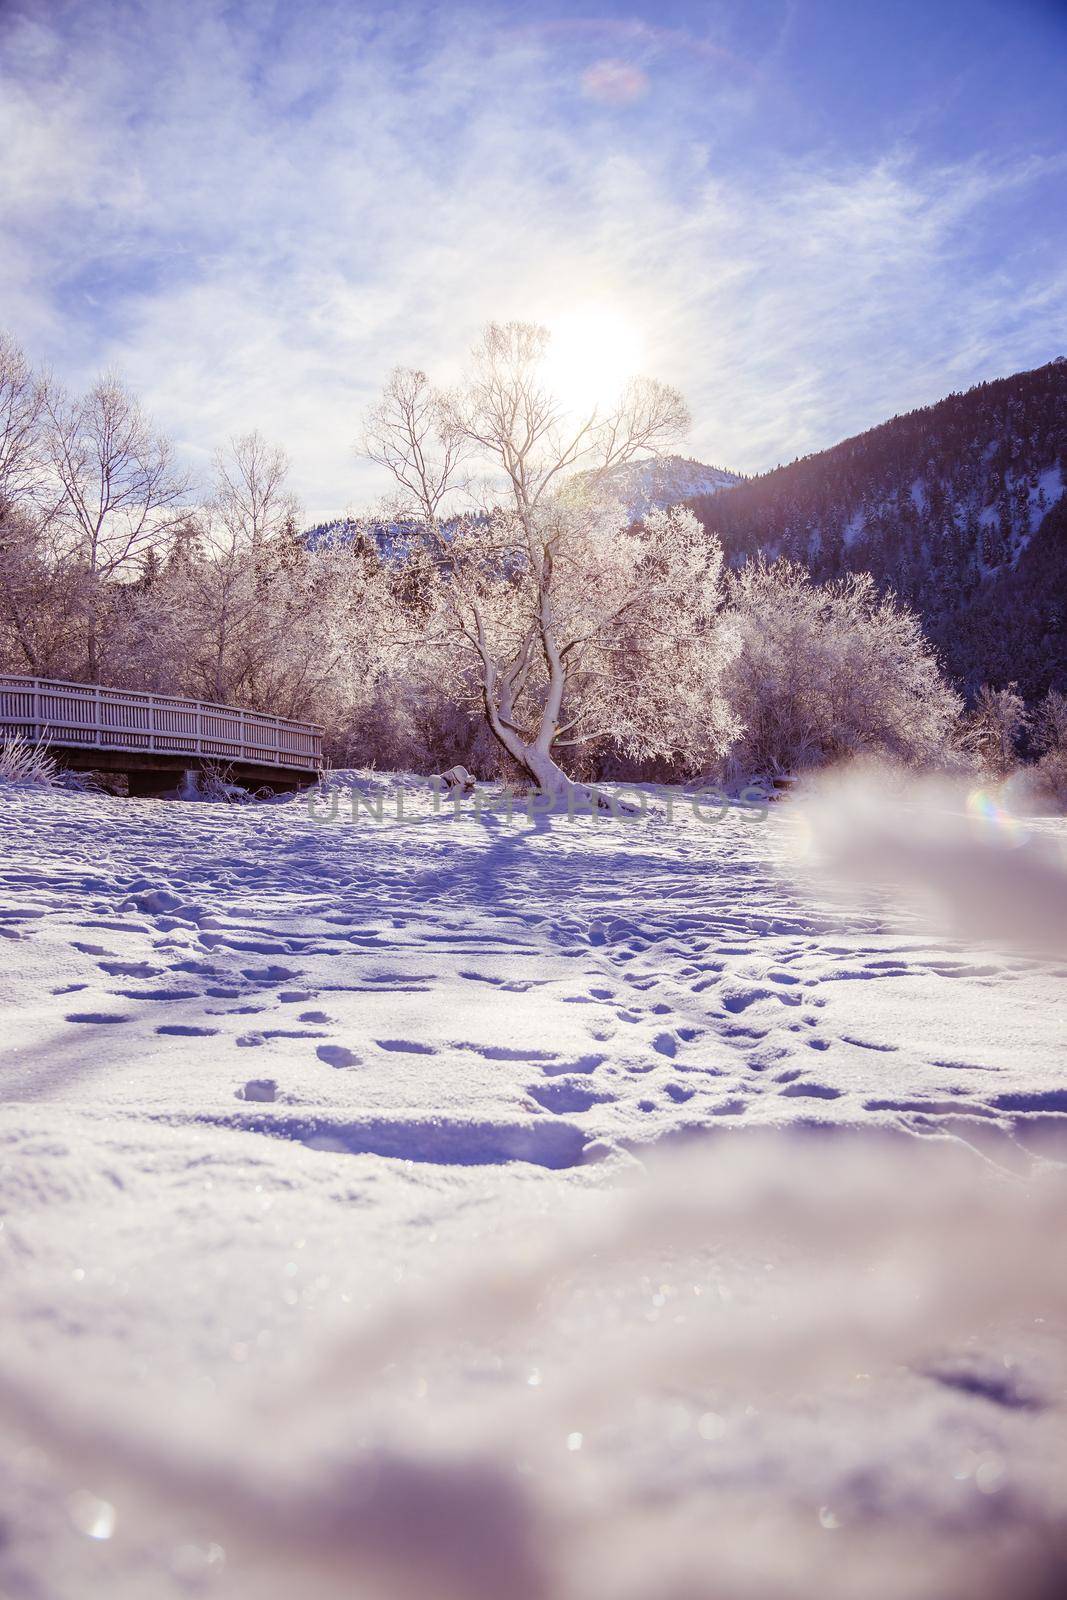 Sunny winter landscape in the alps: Snowy wooden bridge, frosty trees and mountain range by Daxenbichler